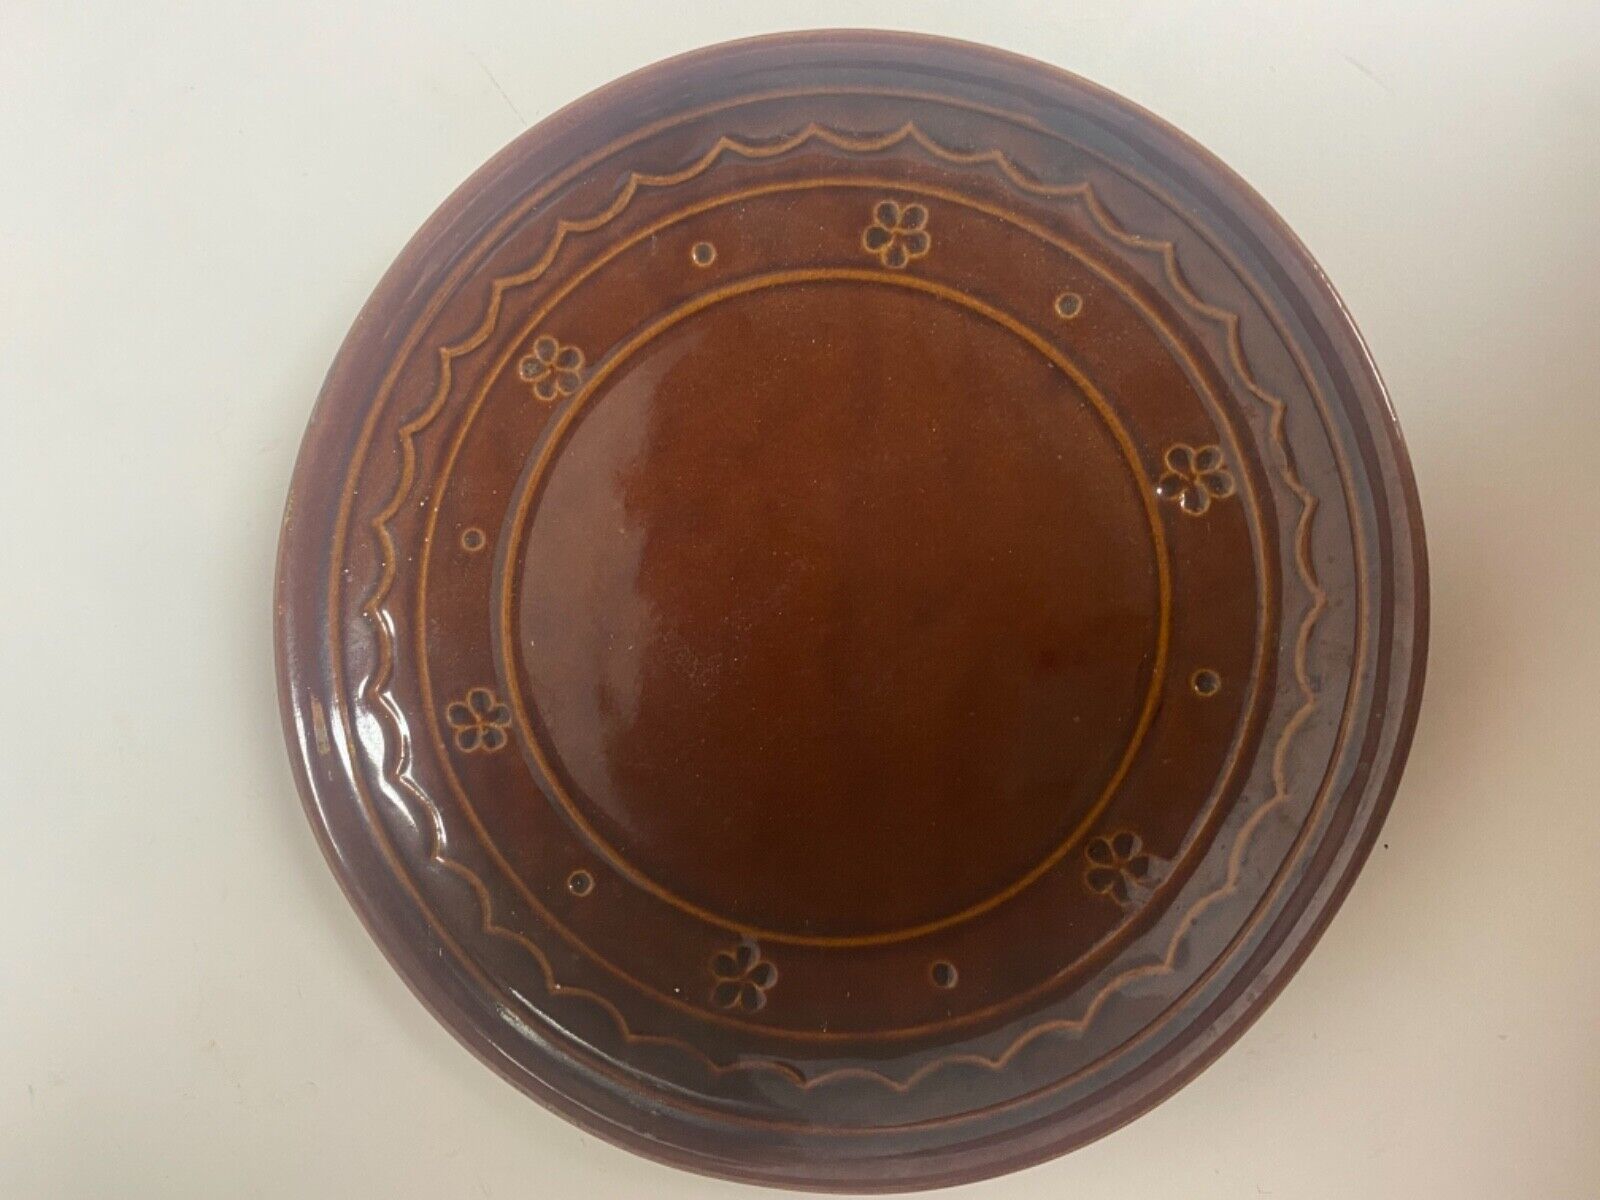 Vintage Mar-Crest Brown Dinner plate, made in the USA.